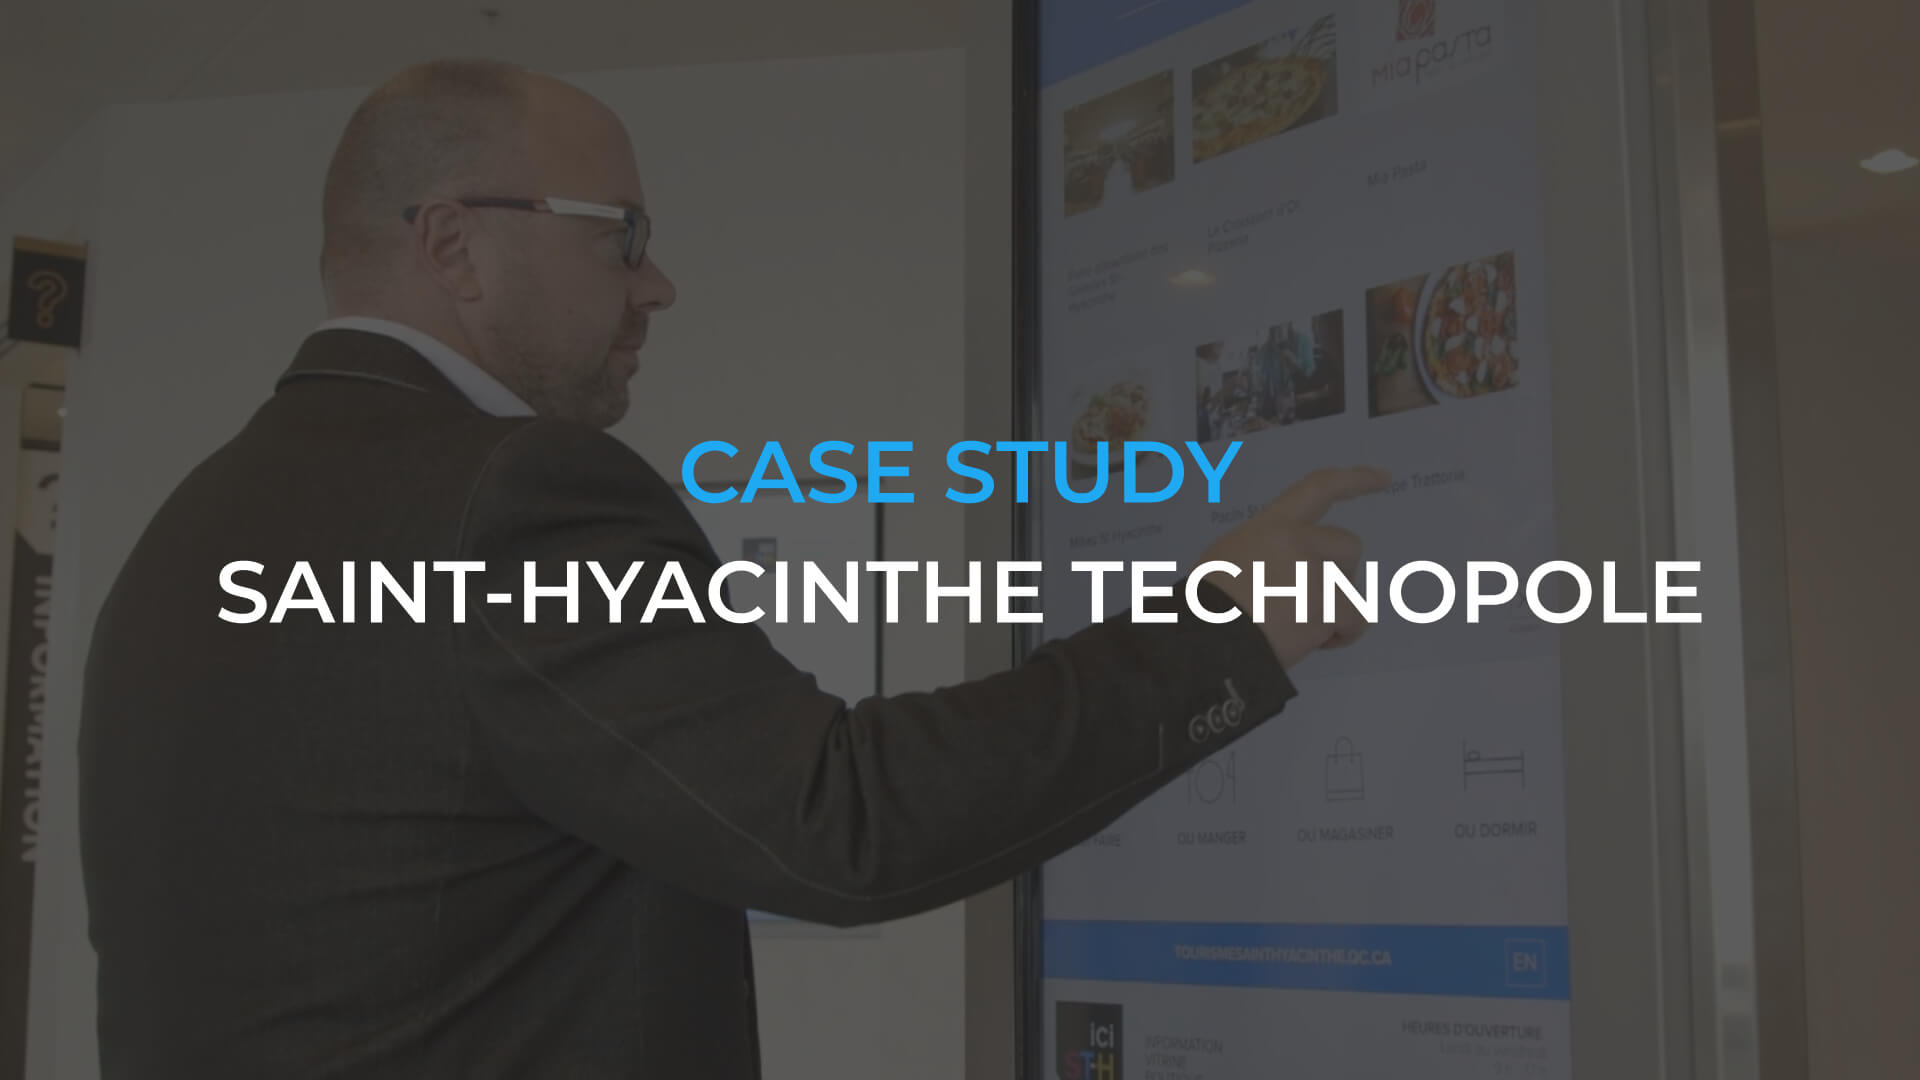 How Saint-Hyacinthe Technopole Has Improved Their Customer Interactions with a Digital Signage Installation